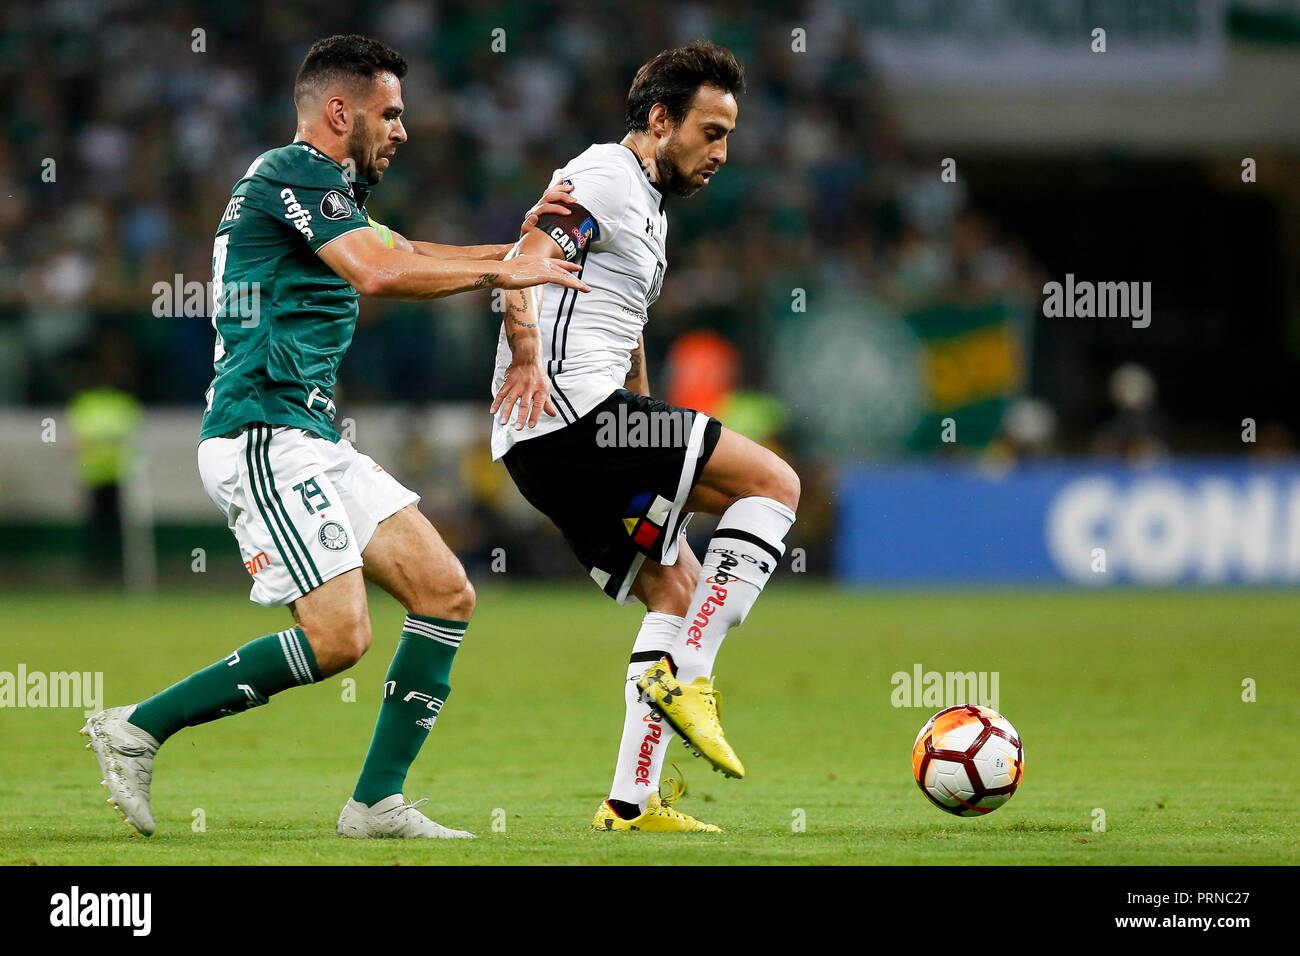 SÃO PAULO, SP - 03.10.2018: PALMEIRAS X COLO COLO - Jorge Valdívia is marked by Bruno Henrique during the match between Palmeiras and Colo-Colo (CHI) held at Allianz Park, West Zone of São Paulo. The match is the second match in the quarterfinals of the 2018 Copa Libertadores. (Photo: Marco Galvão/Fotoarena) Stock Photo